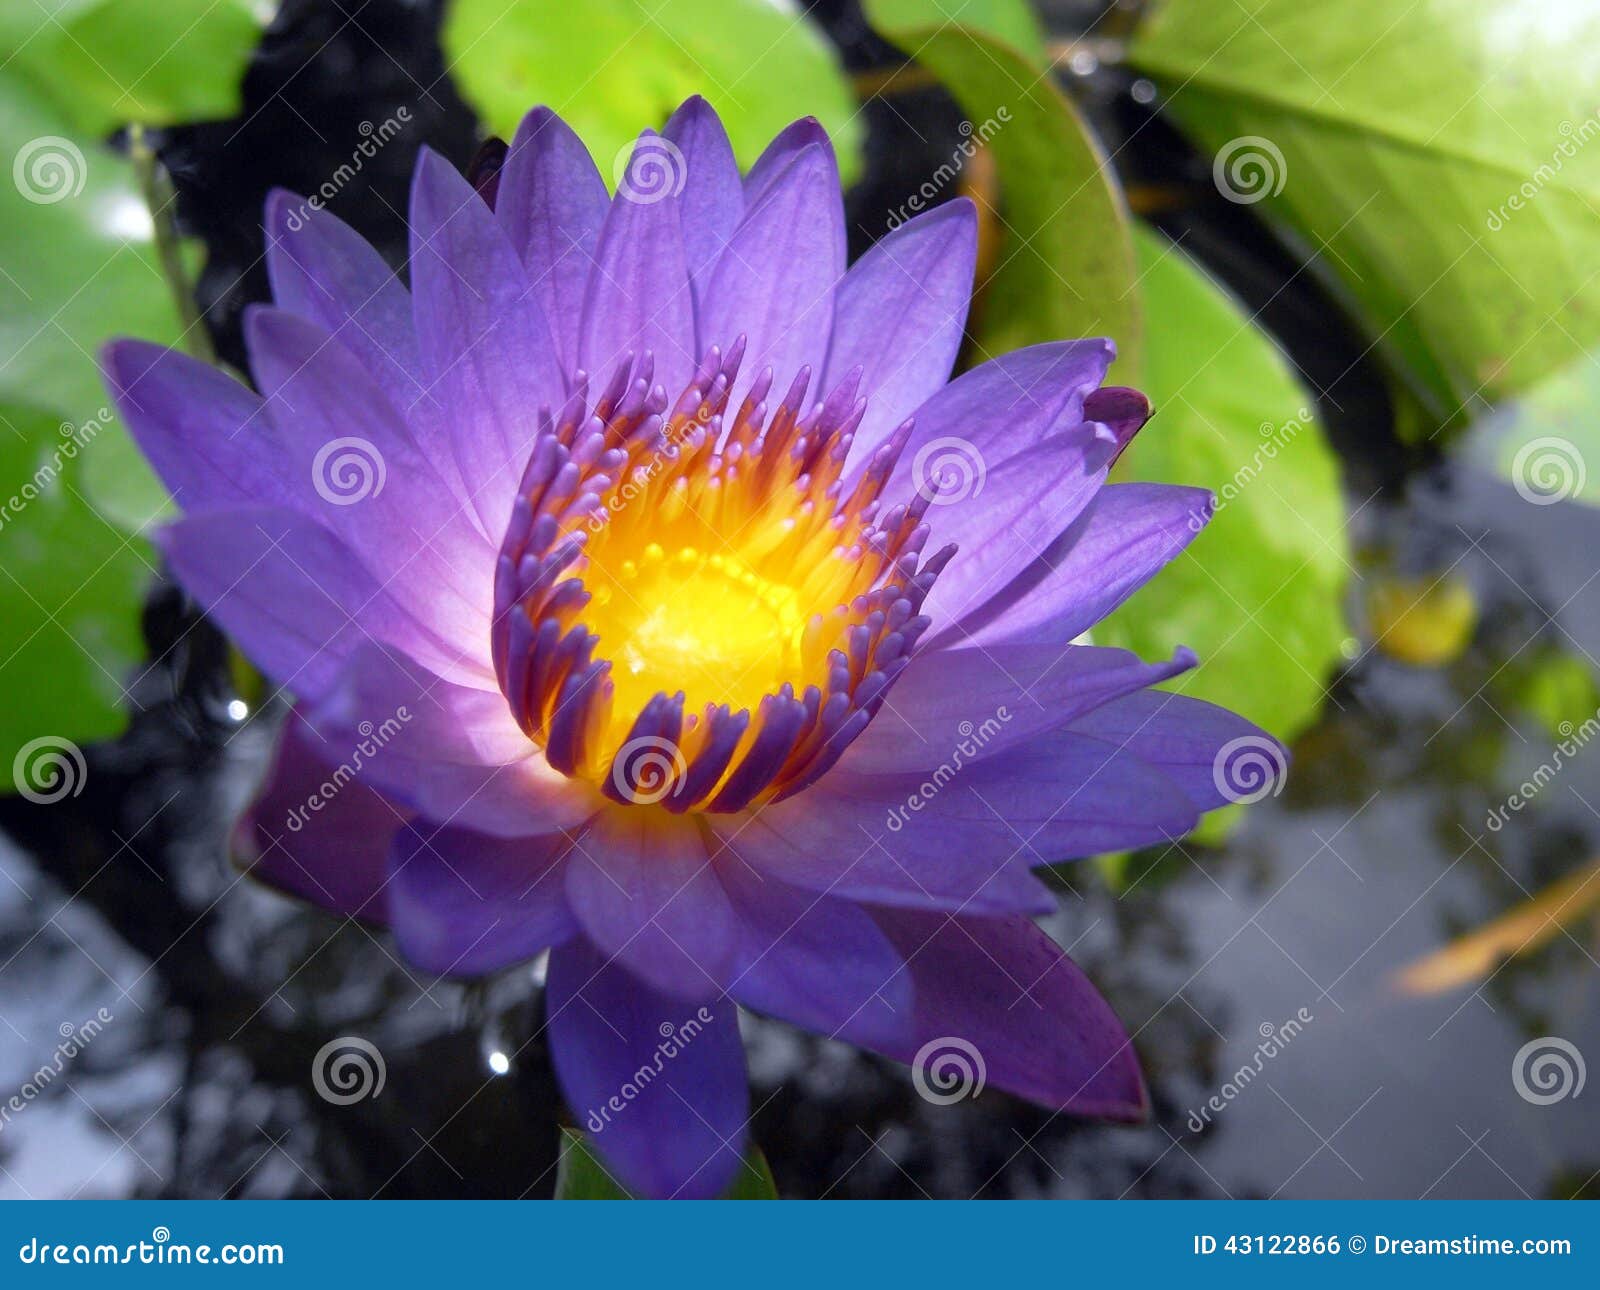 Rich purple water lily